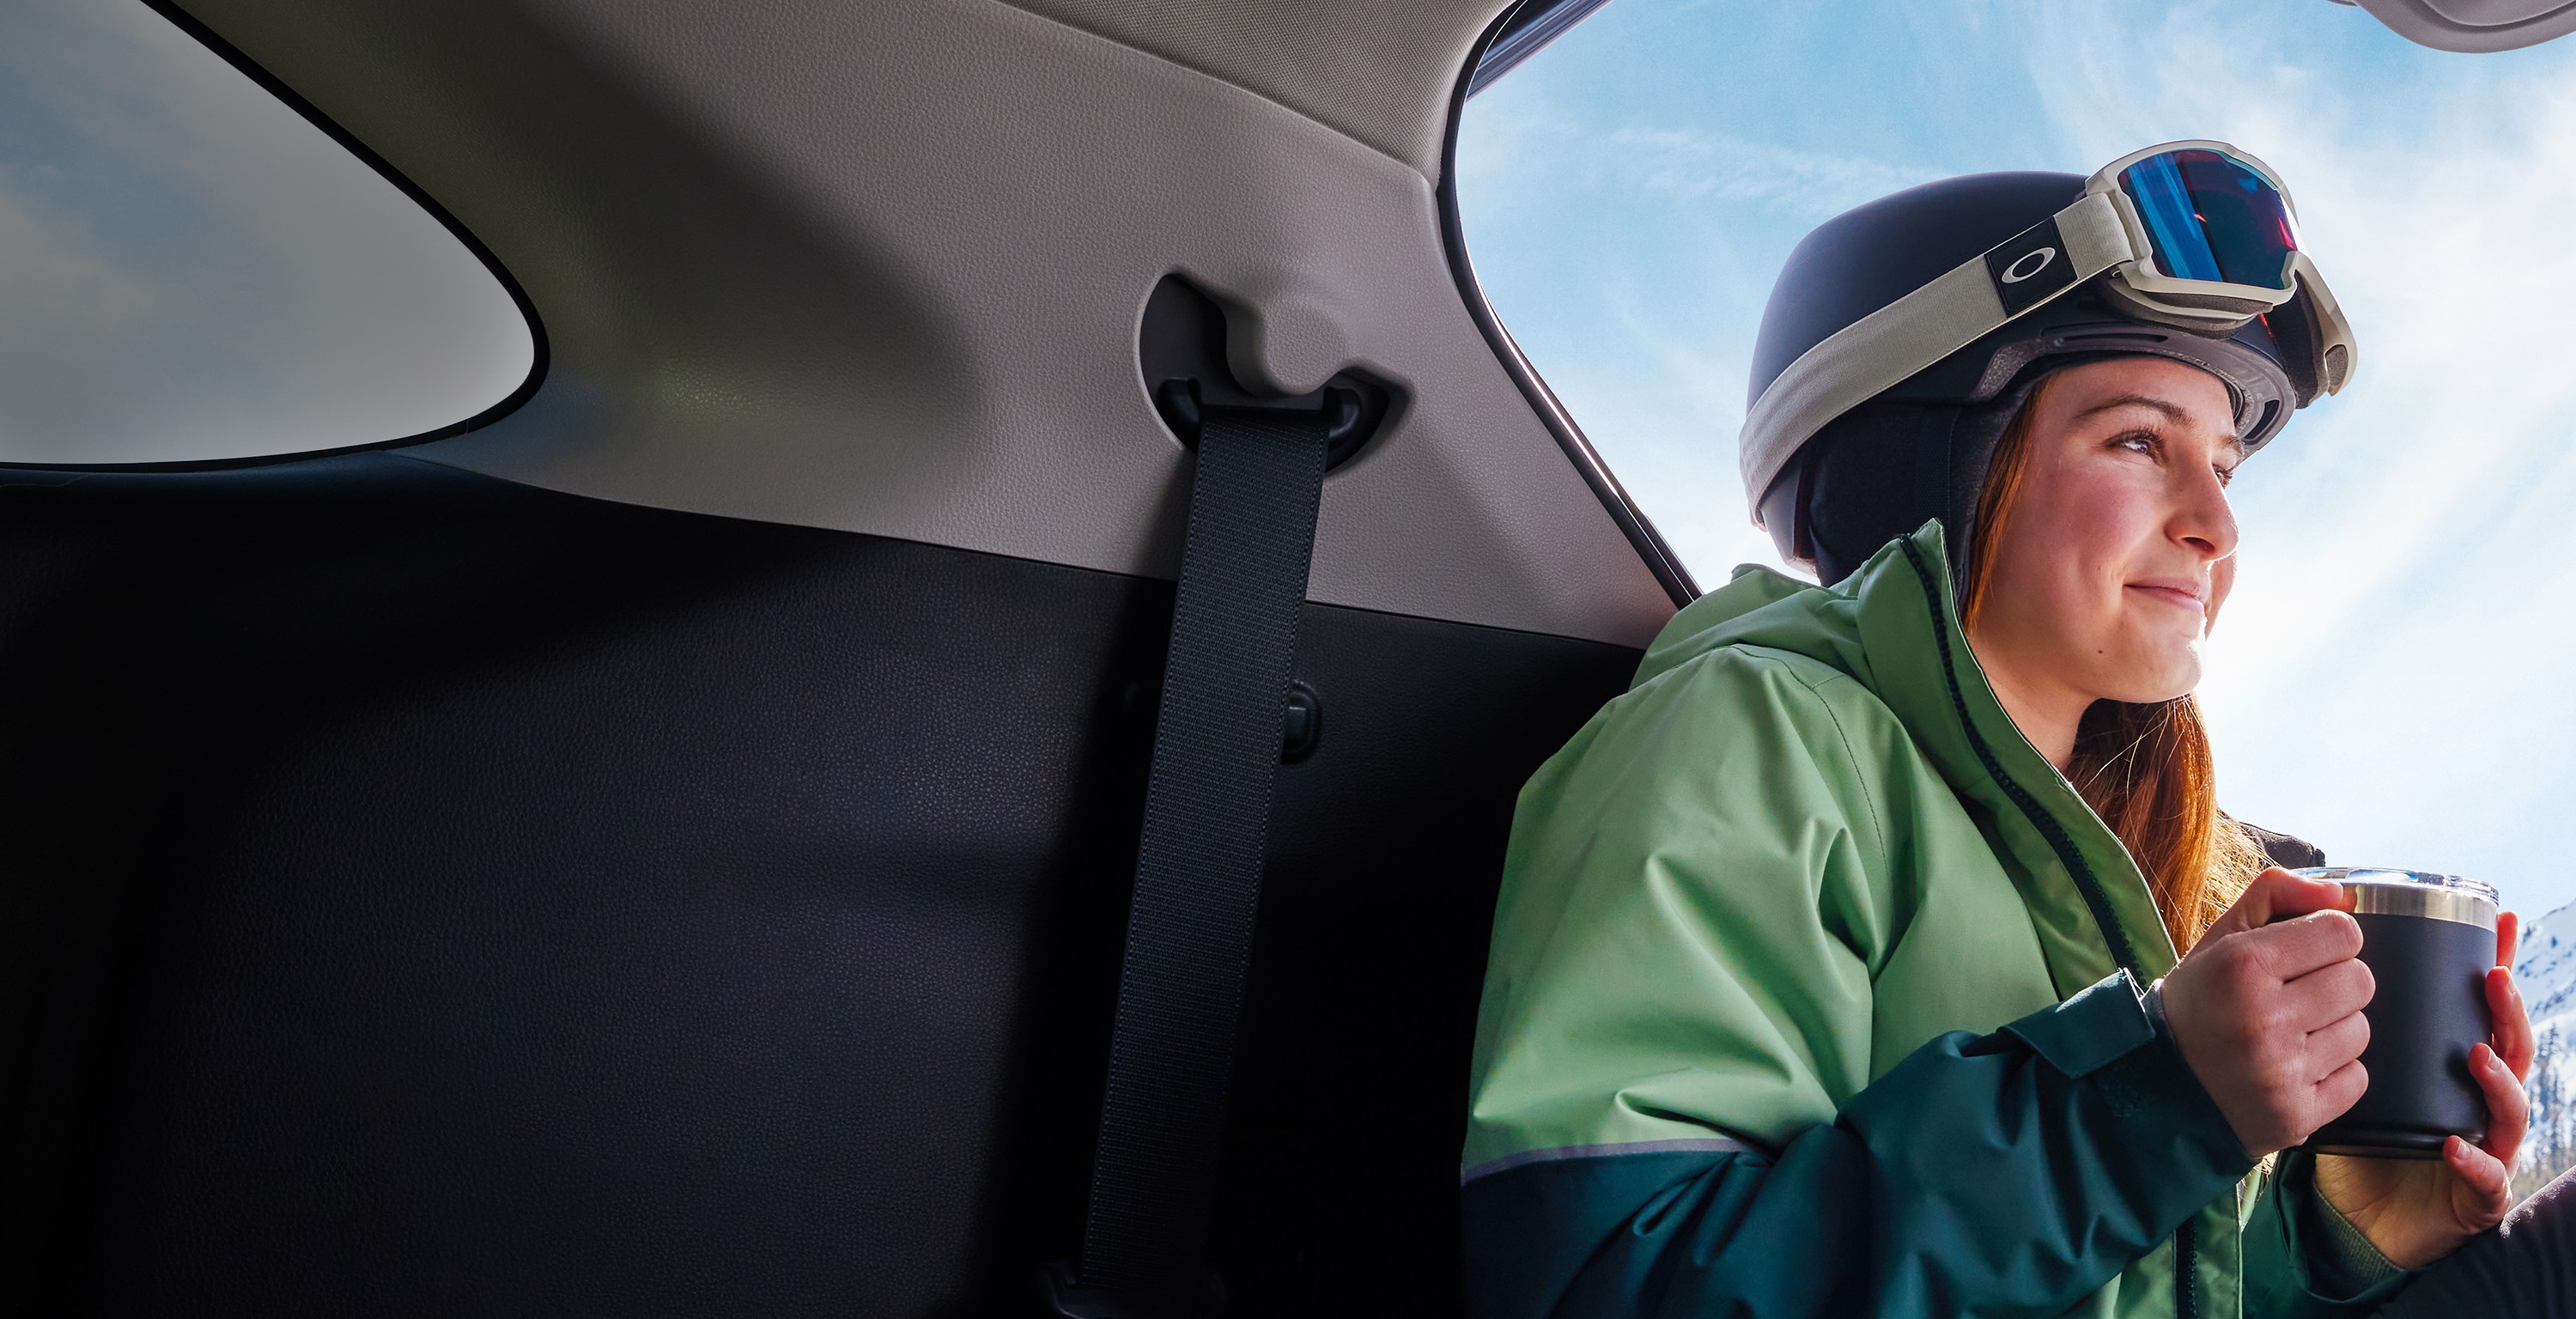 A woman wearing snowboarding gear sits inside a Toyota vehicle. She’s holding a mug of coffee and looks out the window smiling.